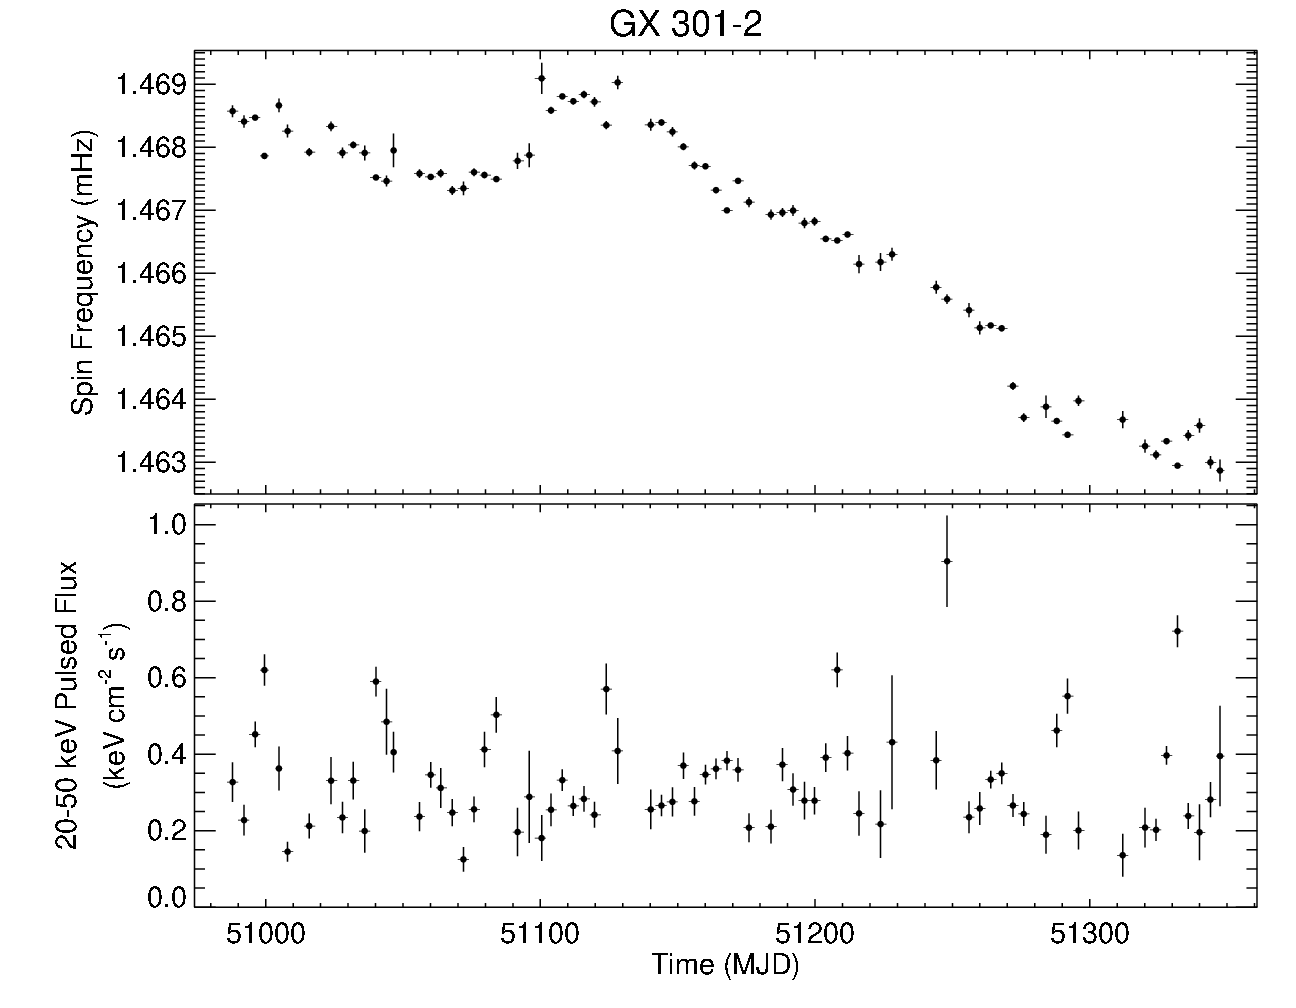 GX 301-2 Short Frequency History